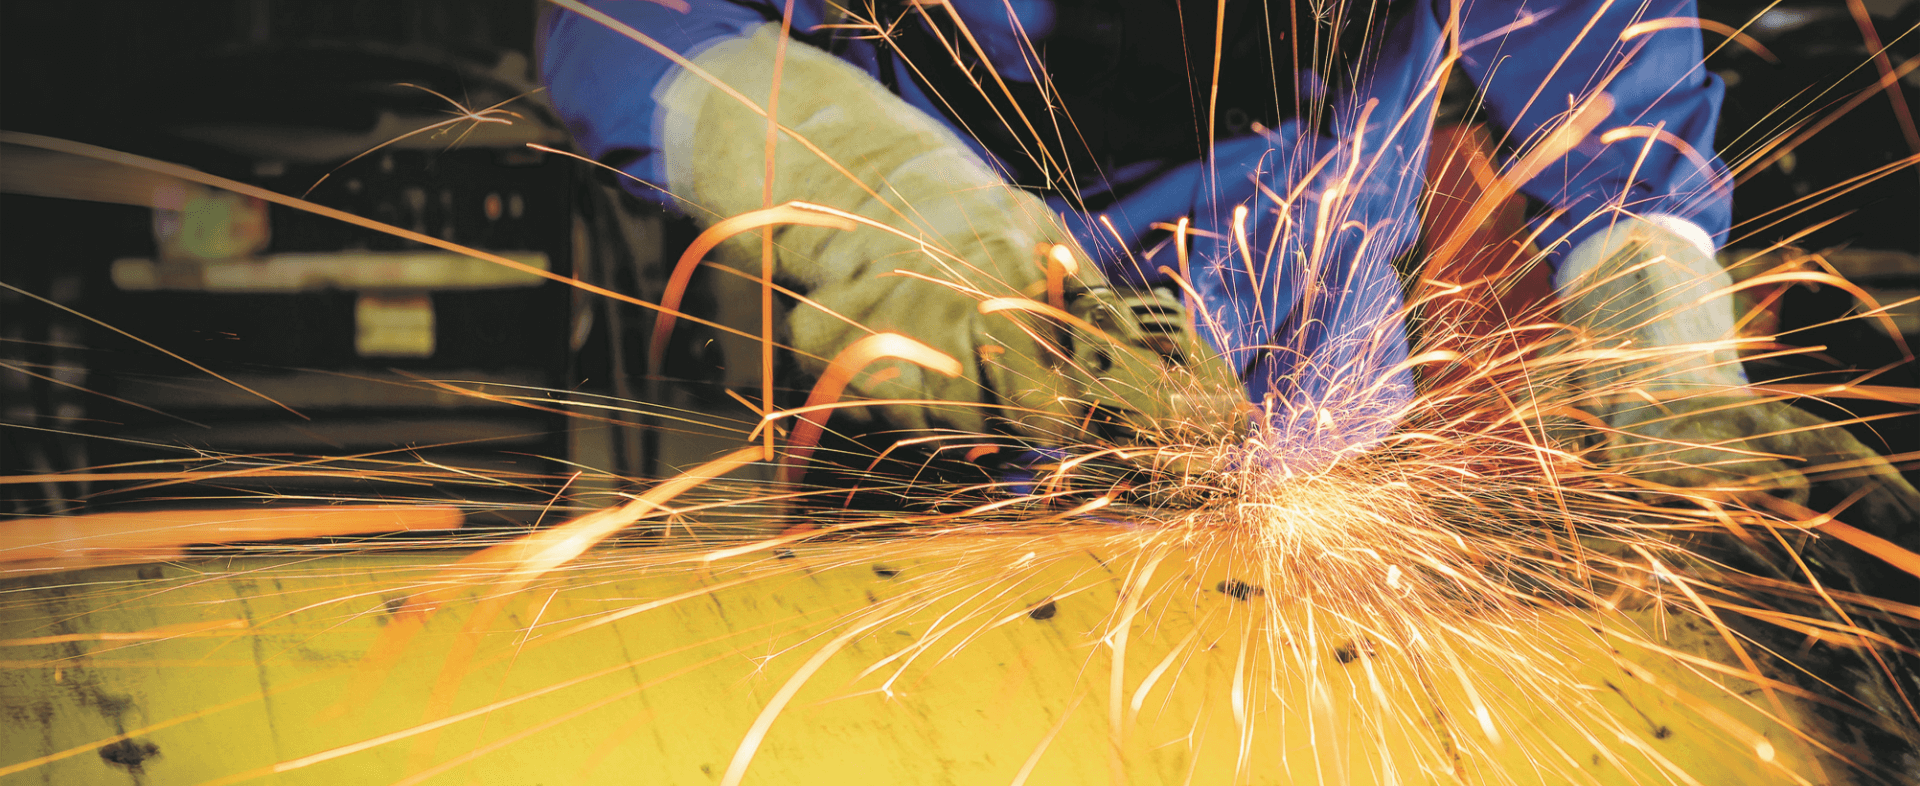 Worker cutting metal as sparks fly